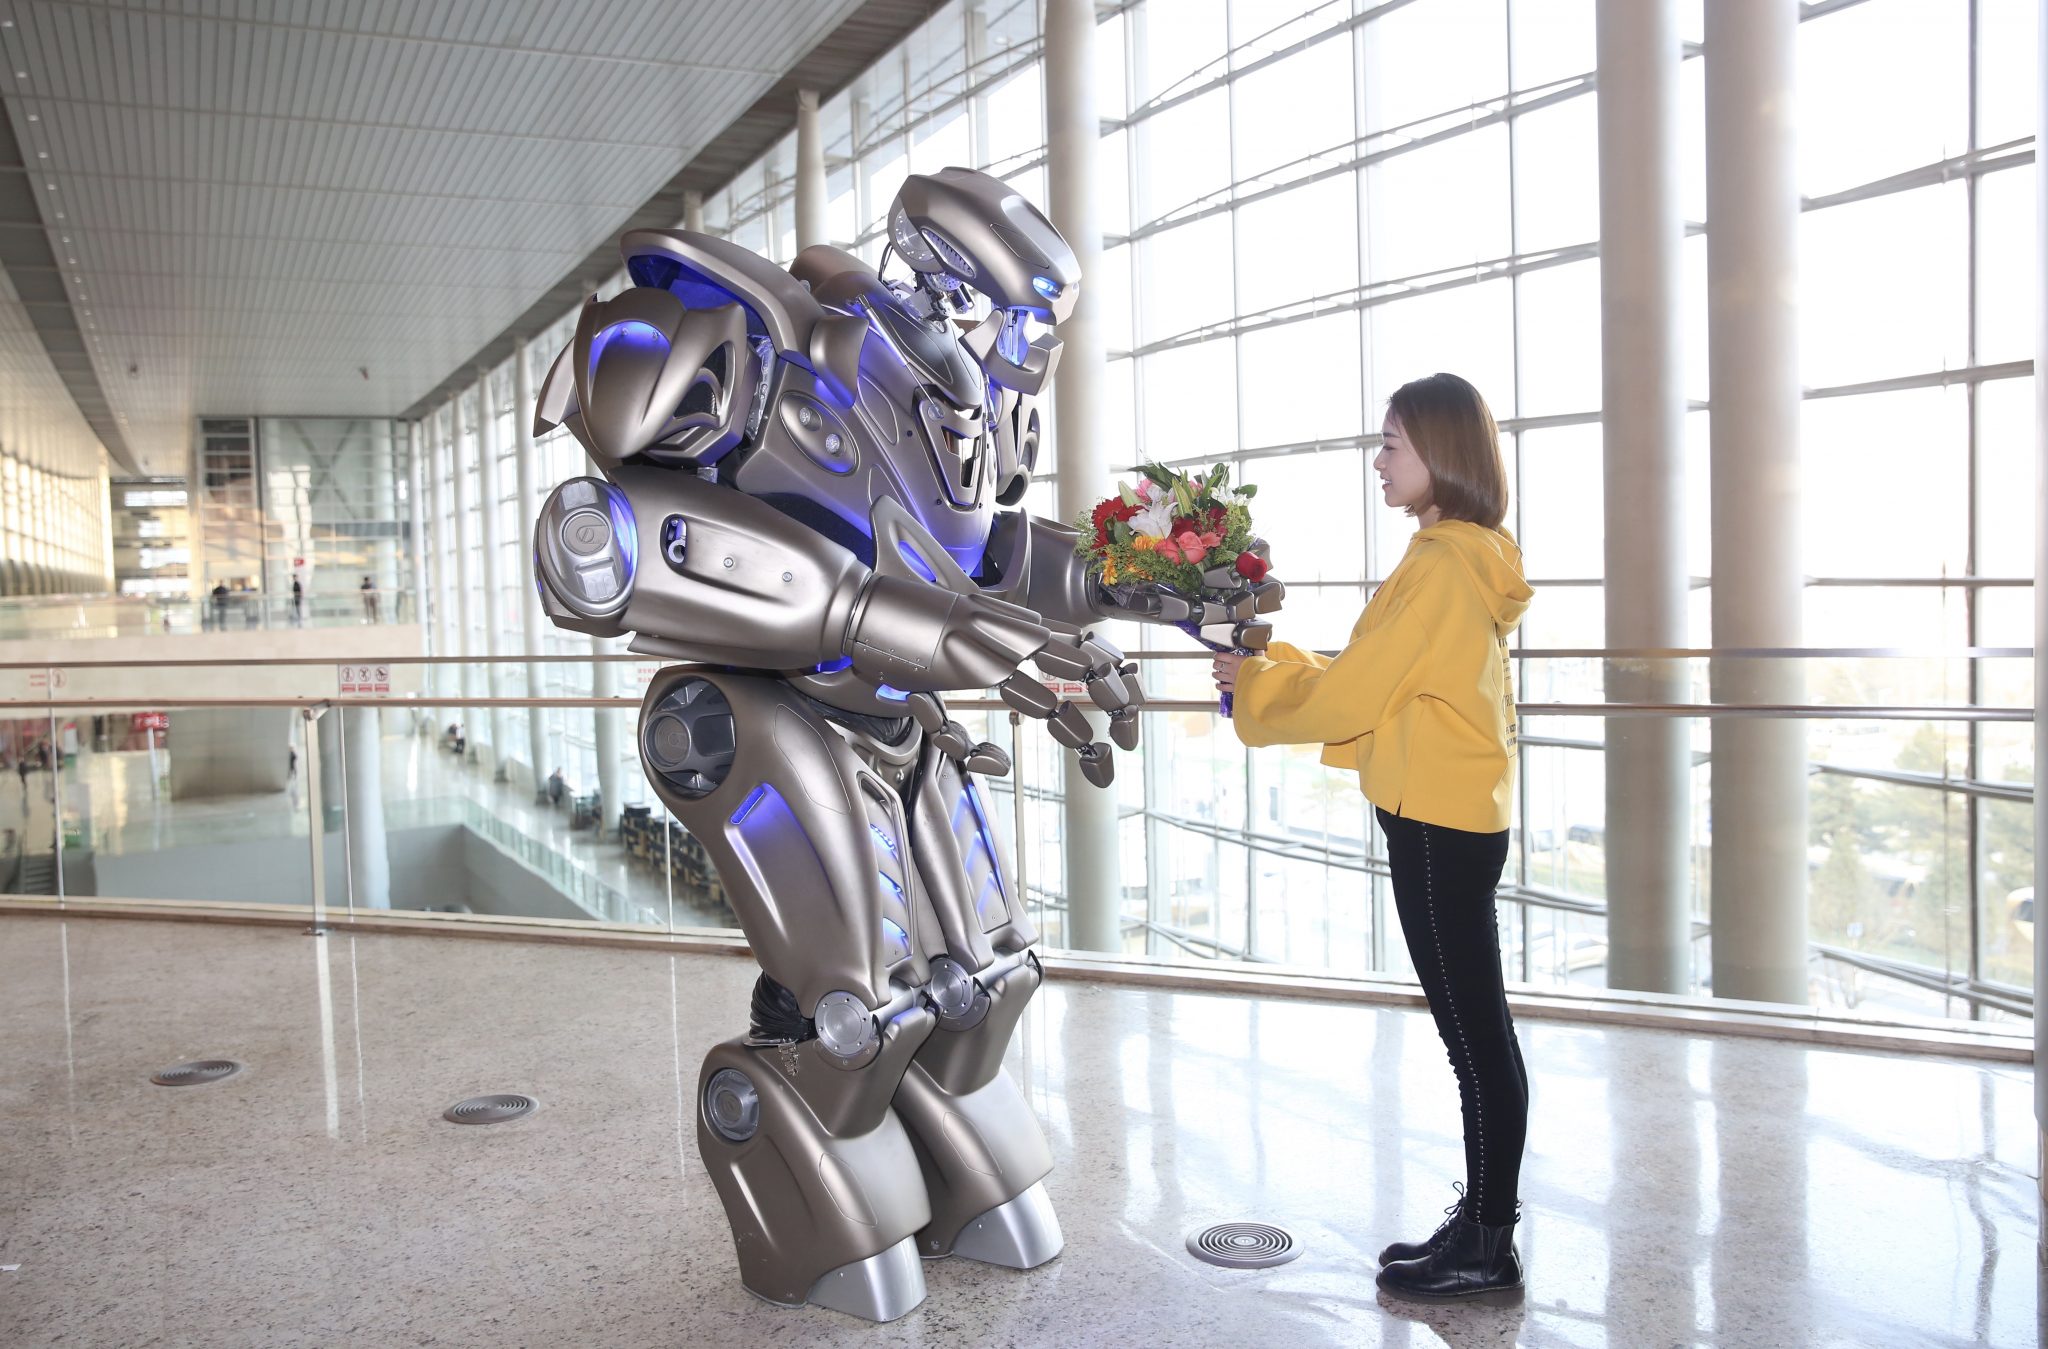 Titan the Robot gives a girls some flowers in China.